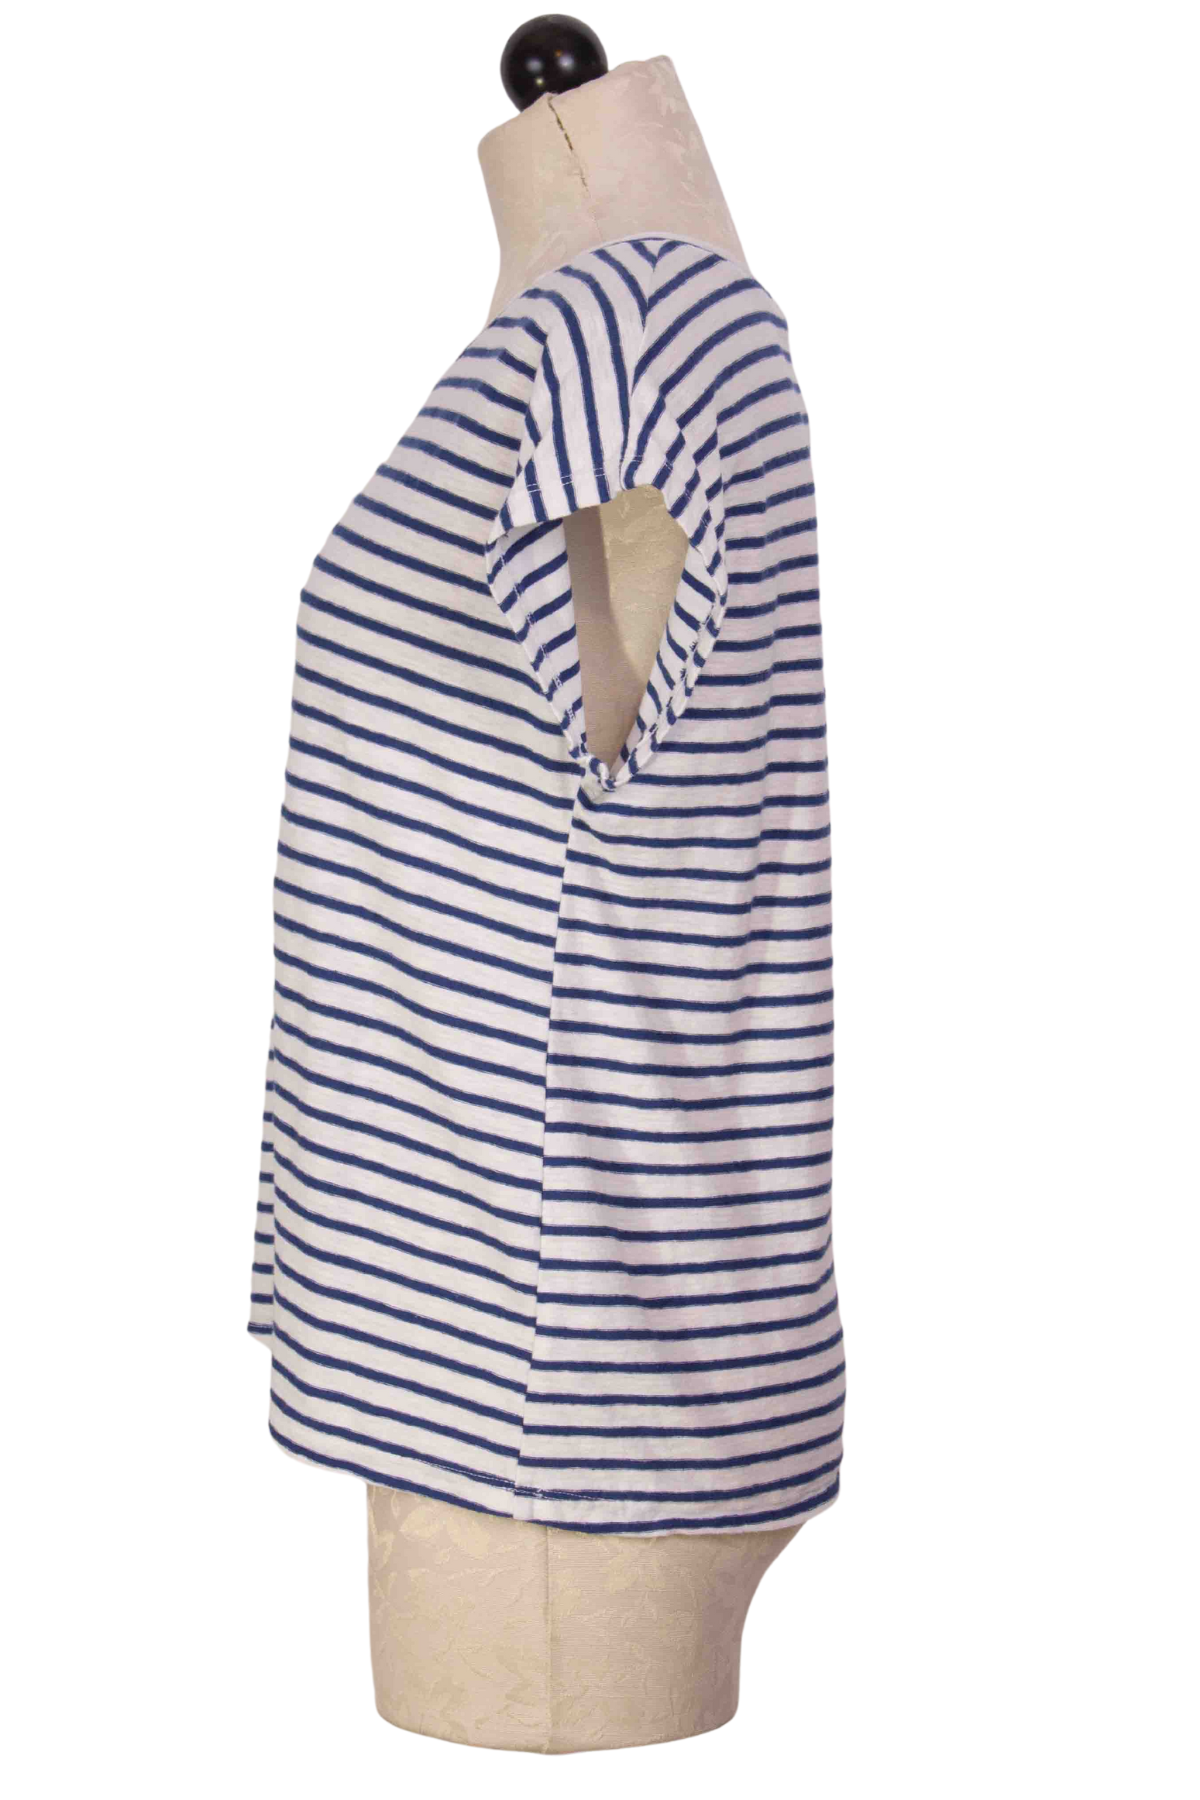 side view of Short Sleeve Navy Striped Boatneck Boxy Top by Cut Loose